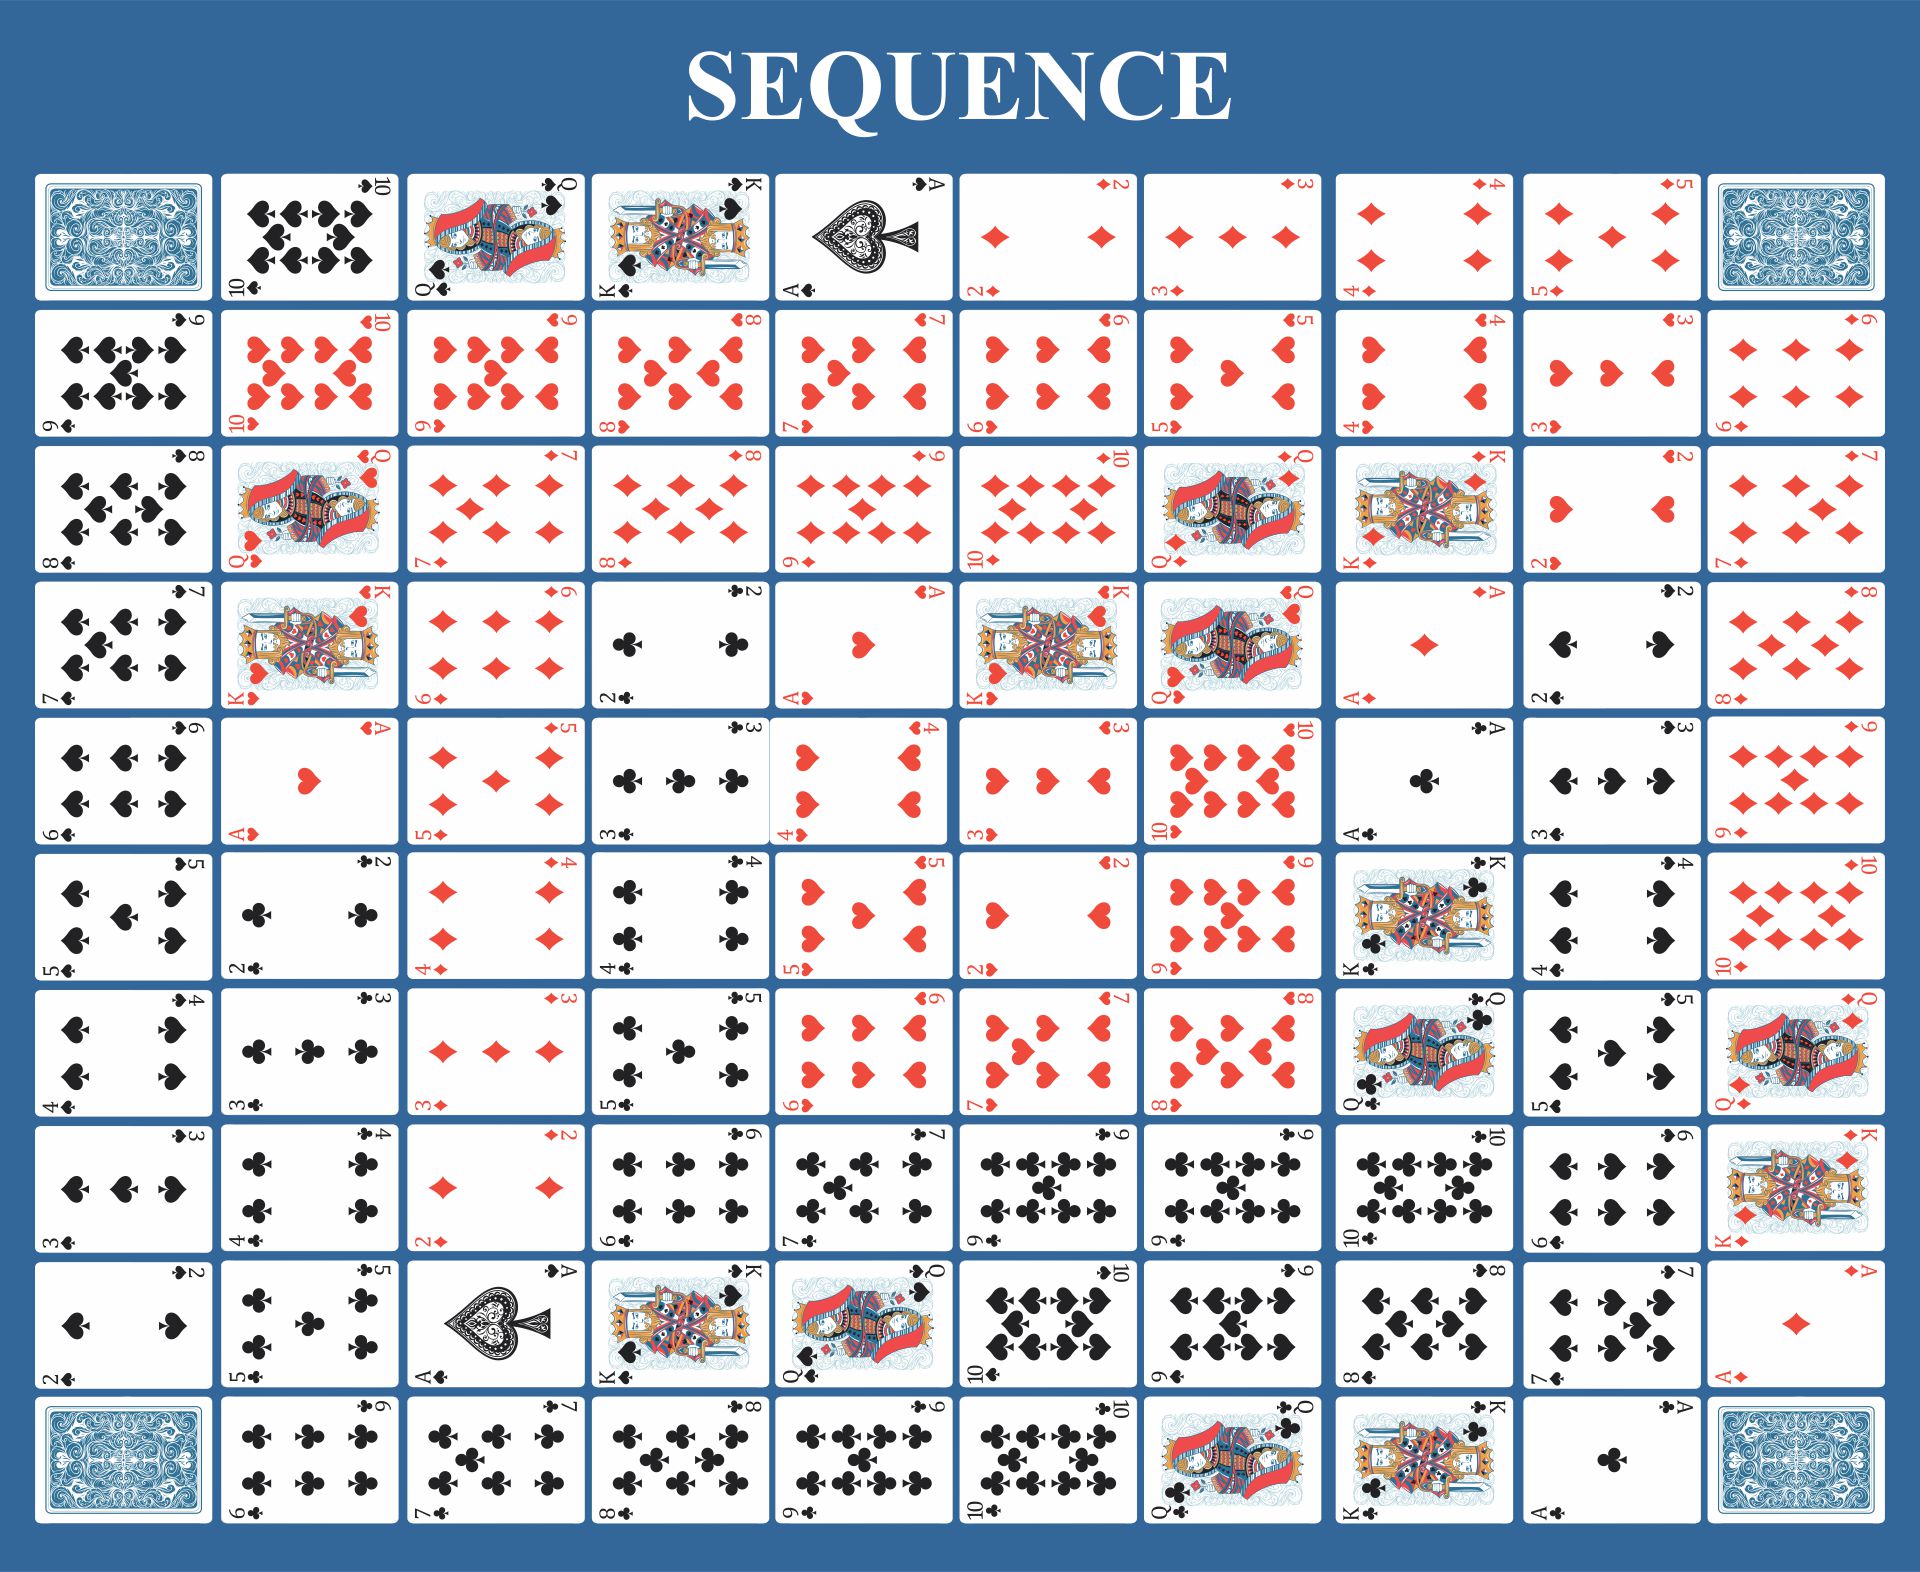 8 Best Images of Sequence Board Game Printable Sequence Board Game